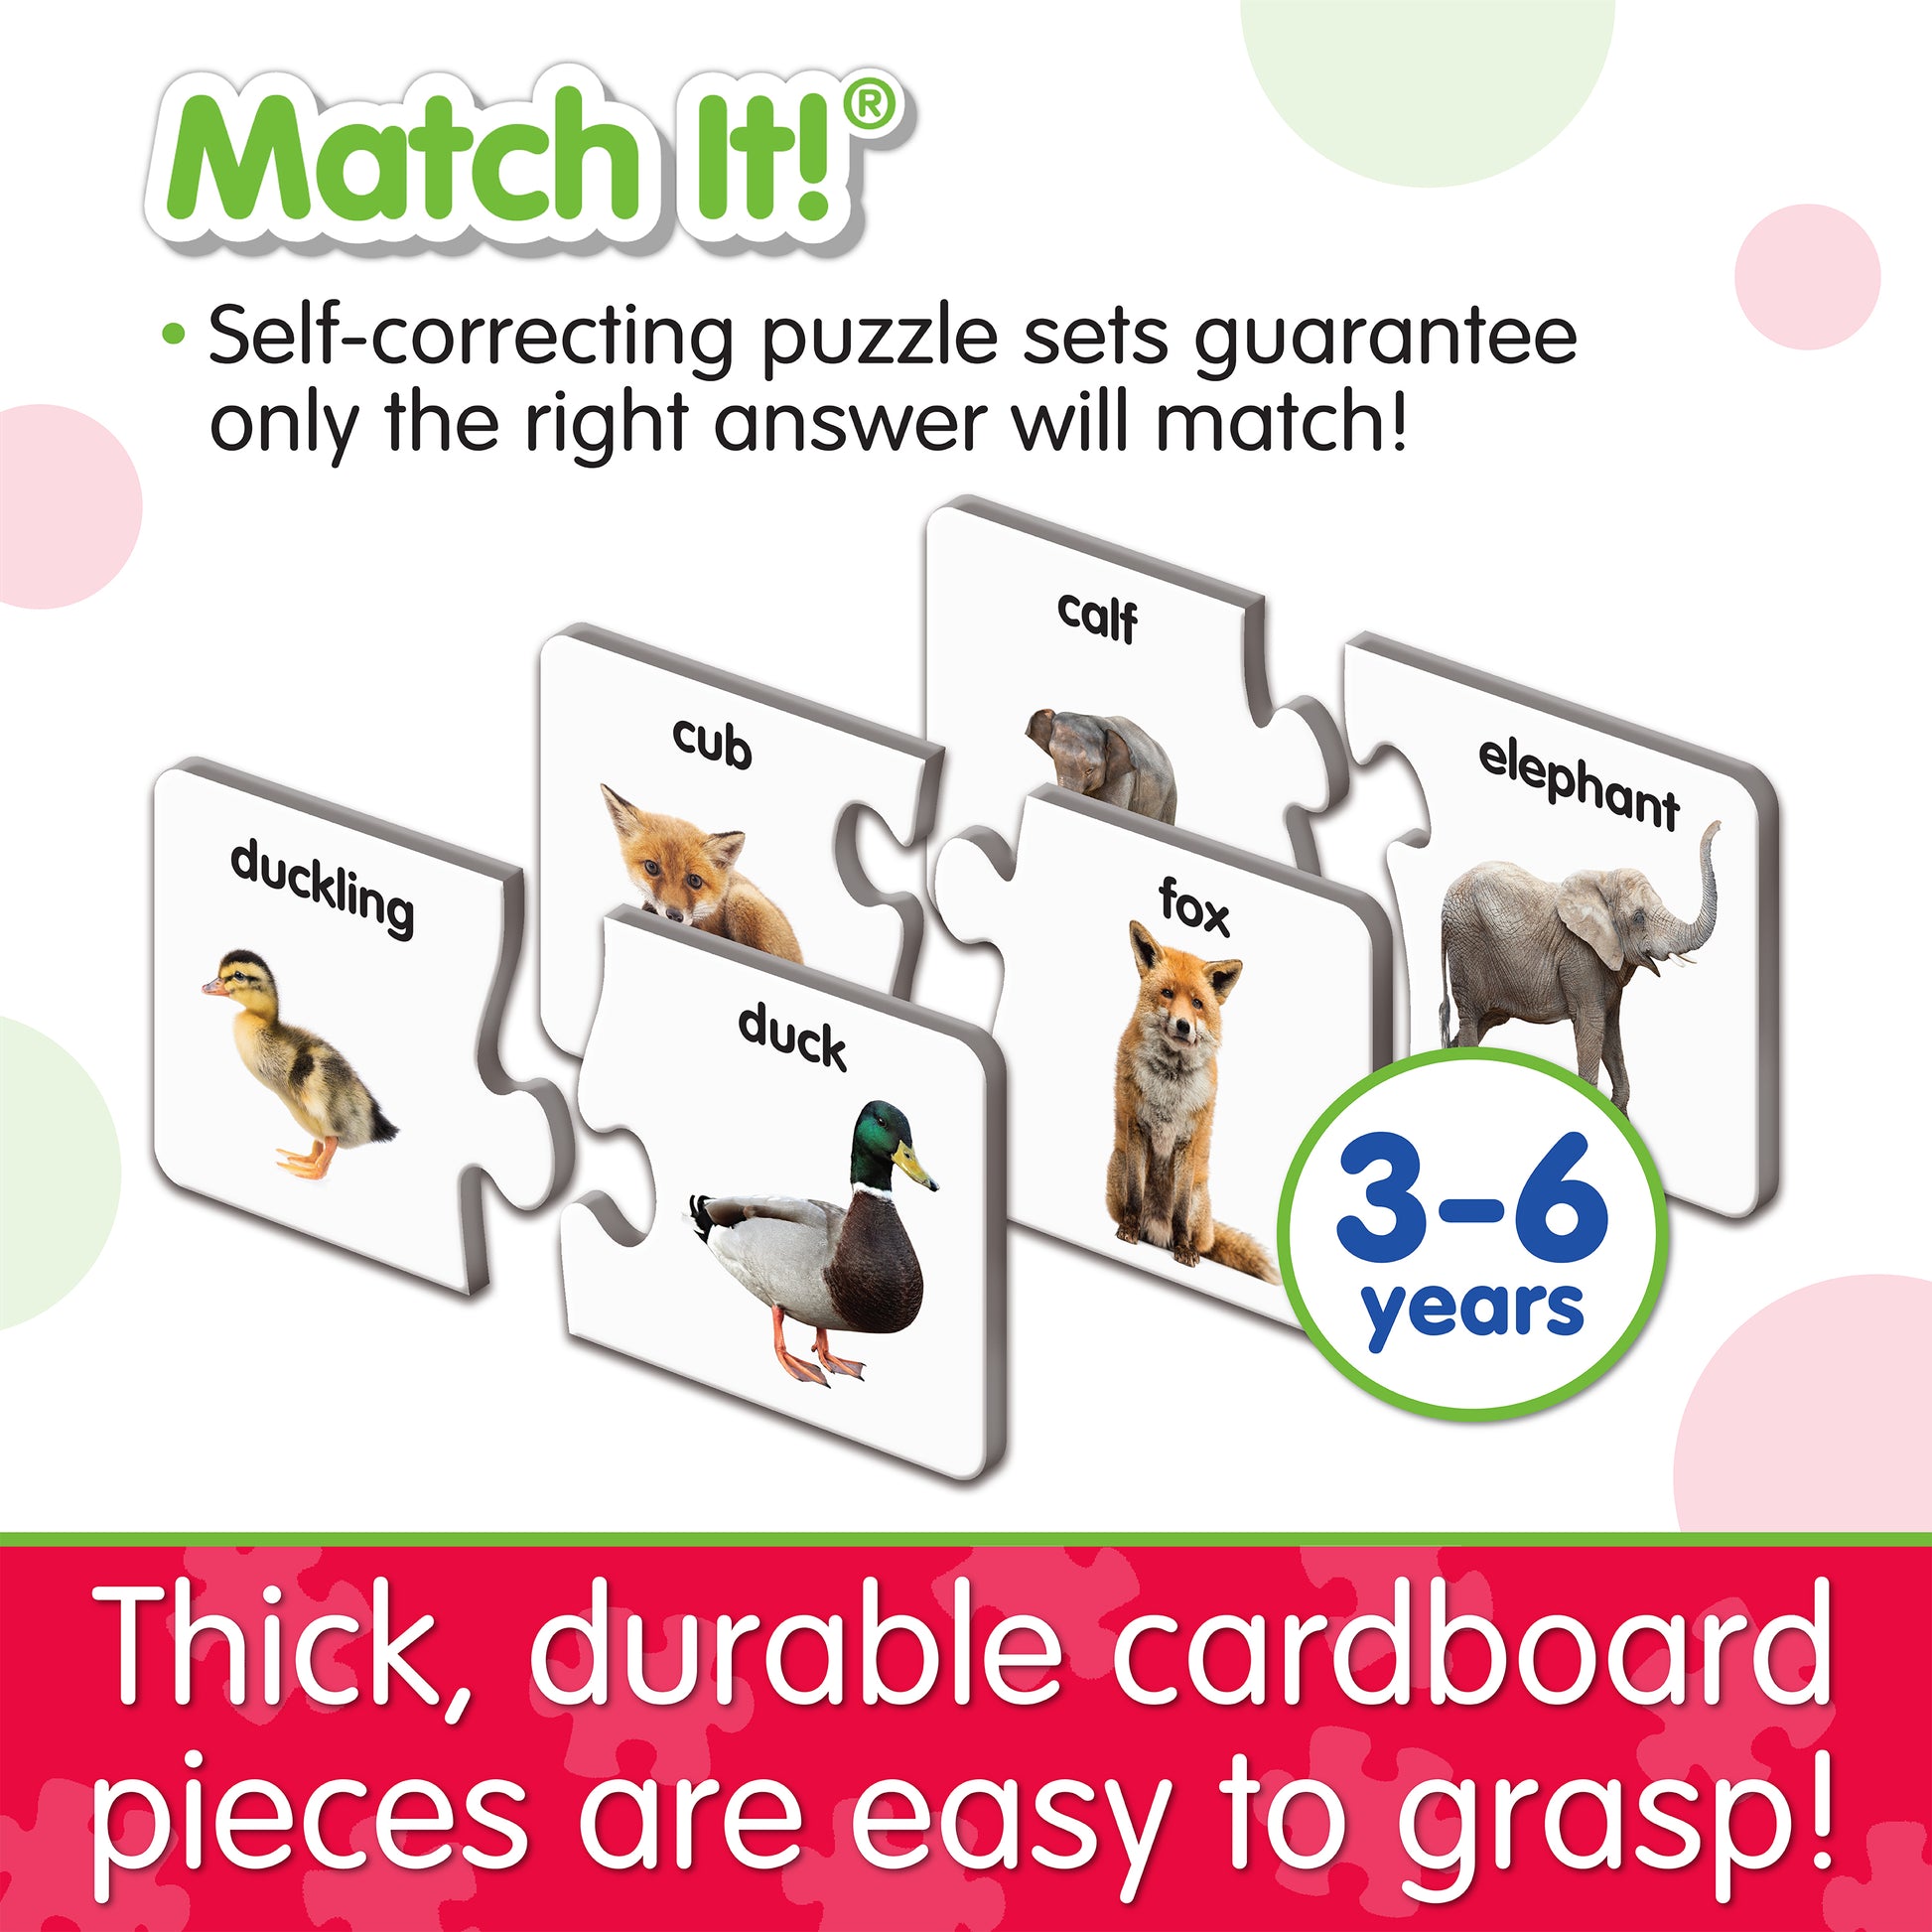 Infographic about Match It - Animal Families' features that says, "Thick, durable cardboard pieces are easy to grasp!"